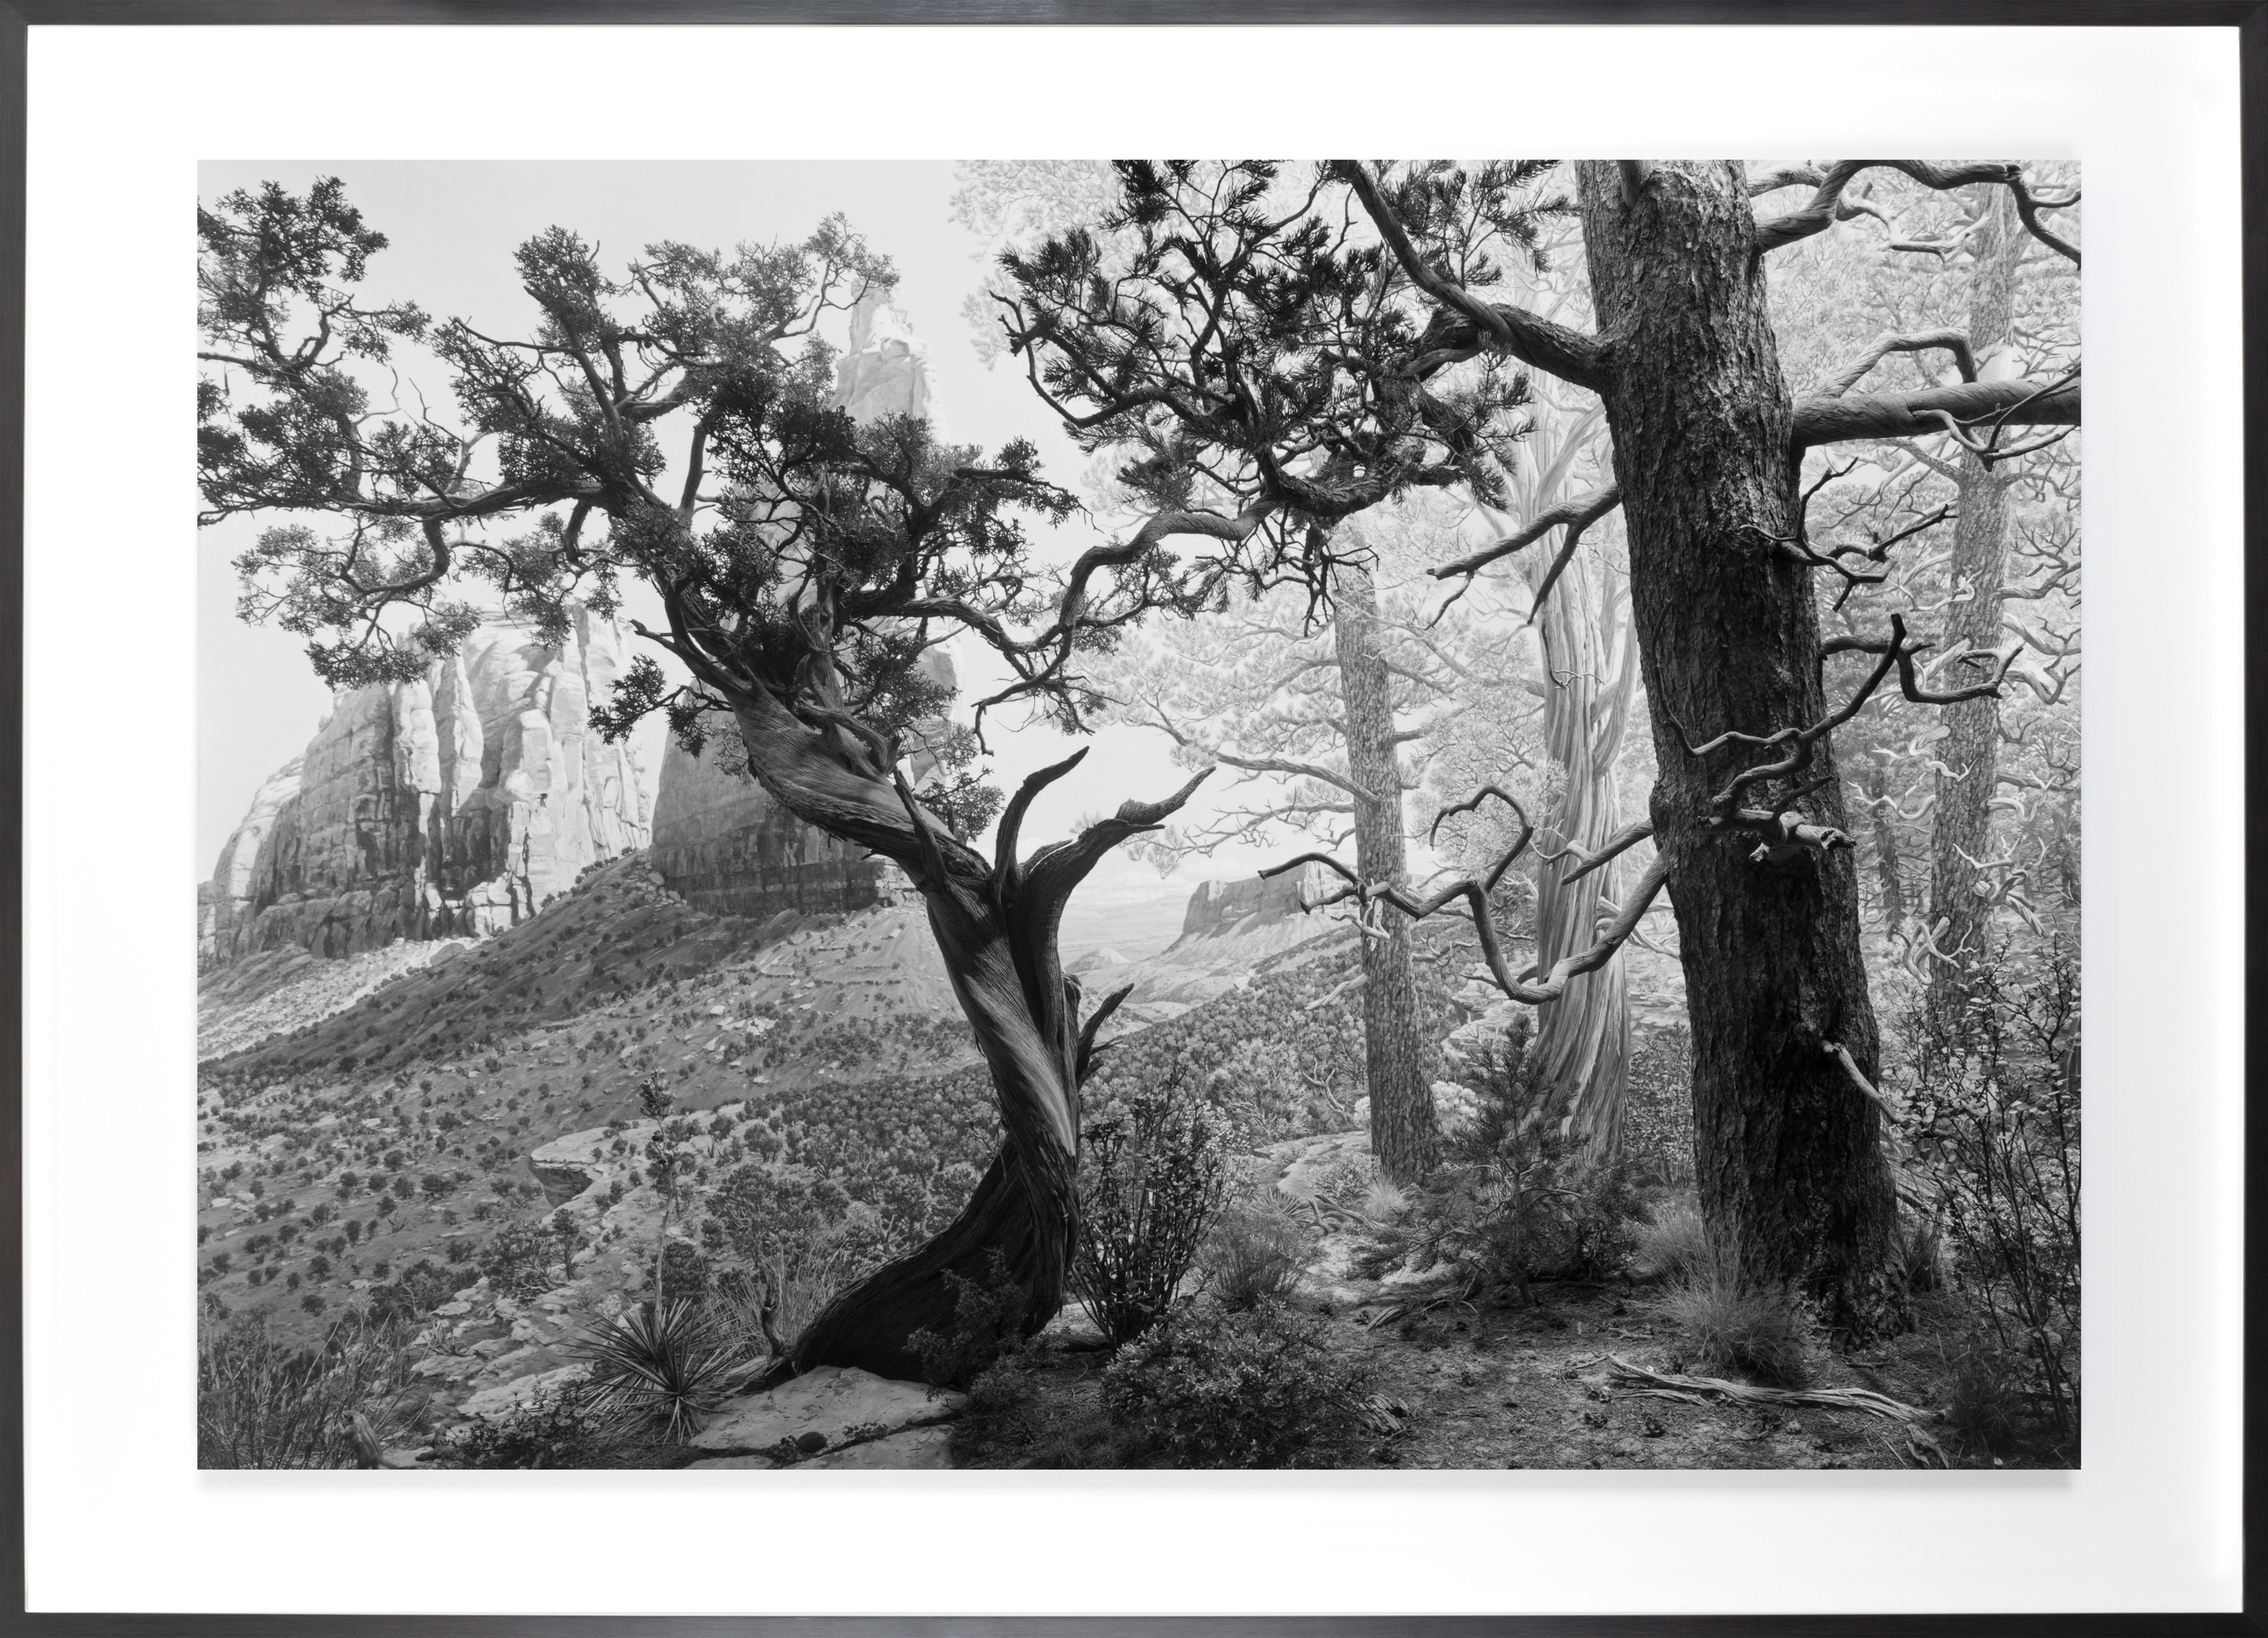 Black and white photograph of dramatically lit gnarled trees with rock edifices in the background.